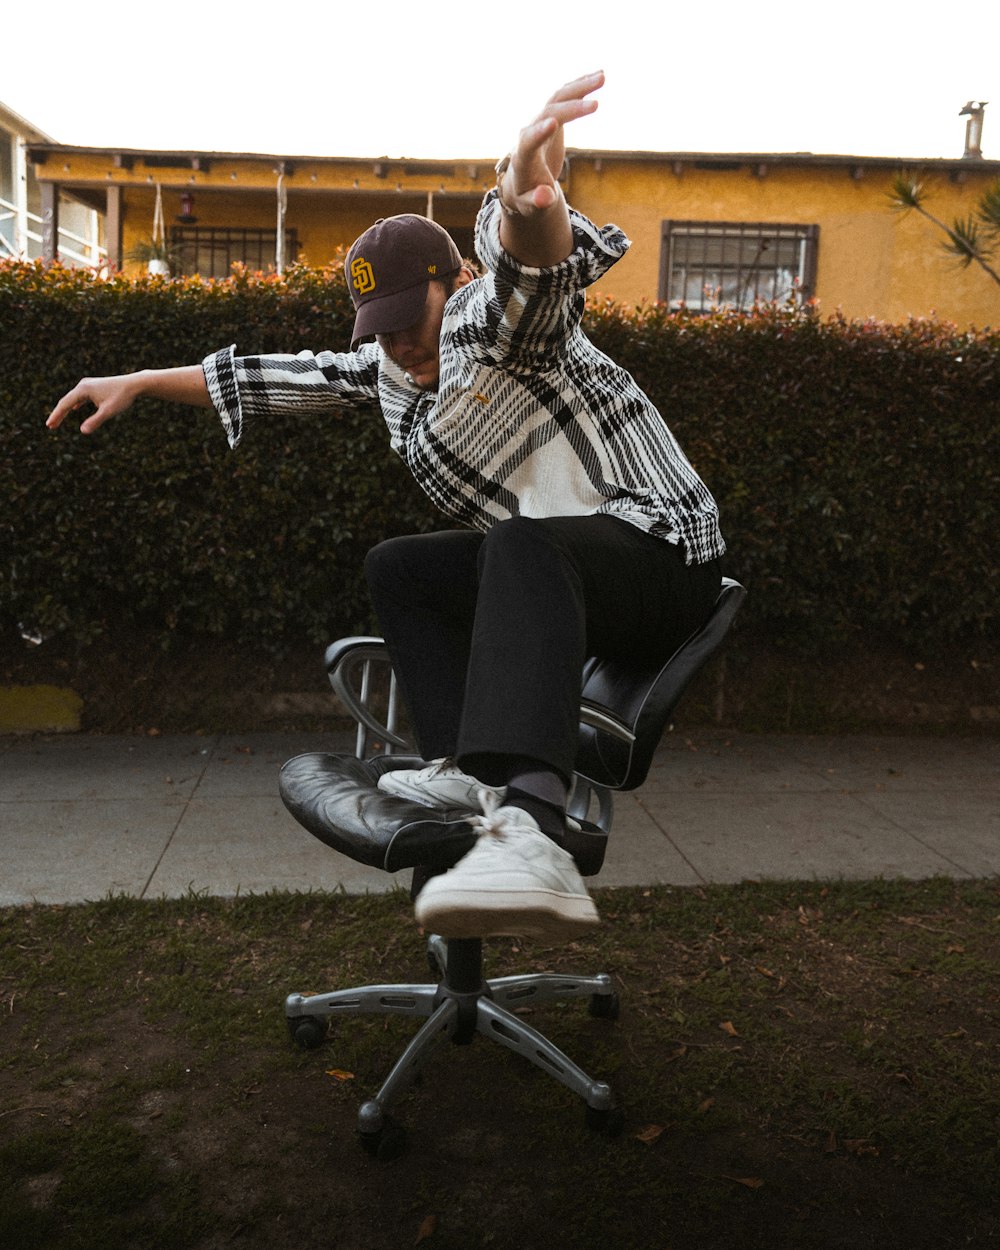 a man is doing a trick on a chair